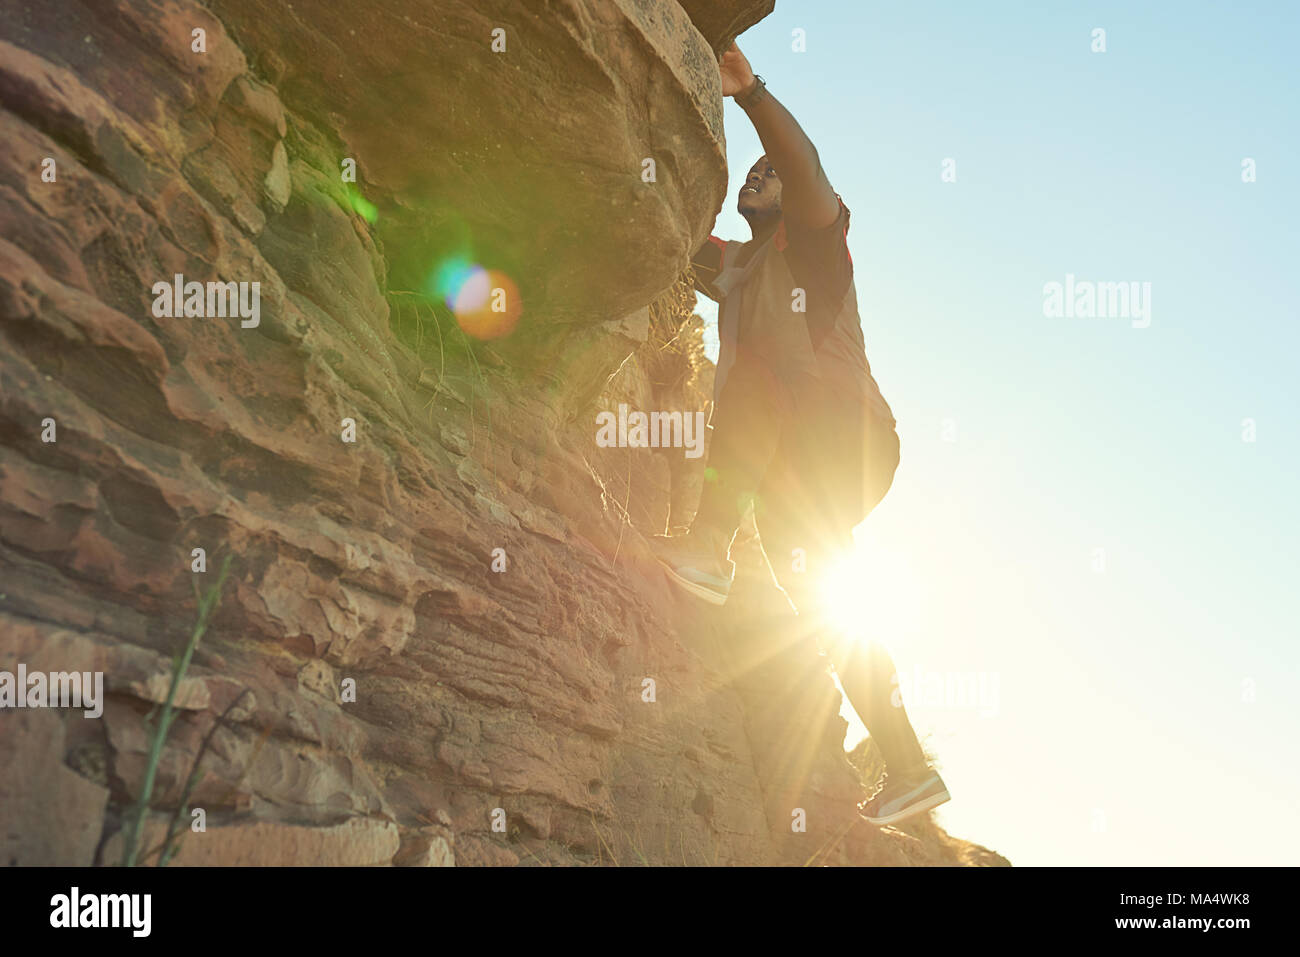 African guy climbing a near vertical rock face with clear blue skies and flare from the sun shining through from behind the climber. Stock Photo